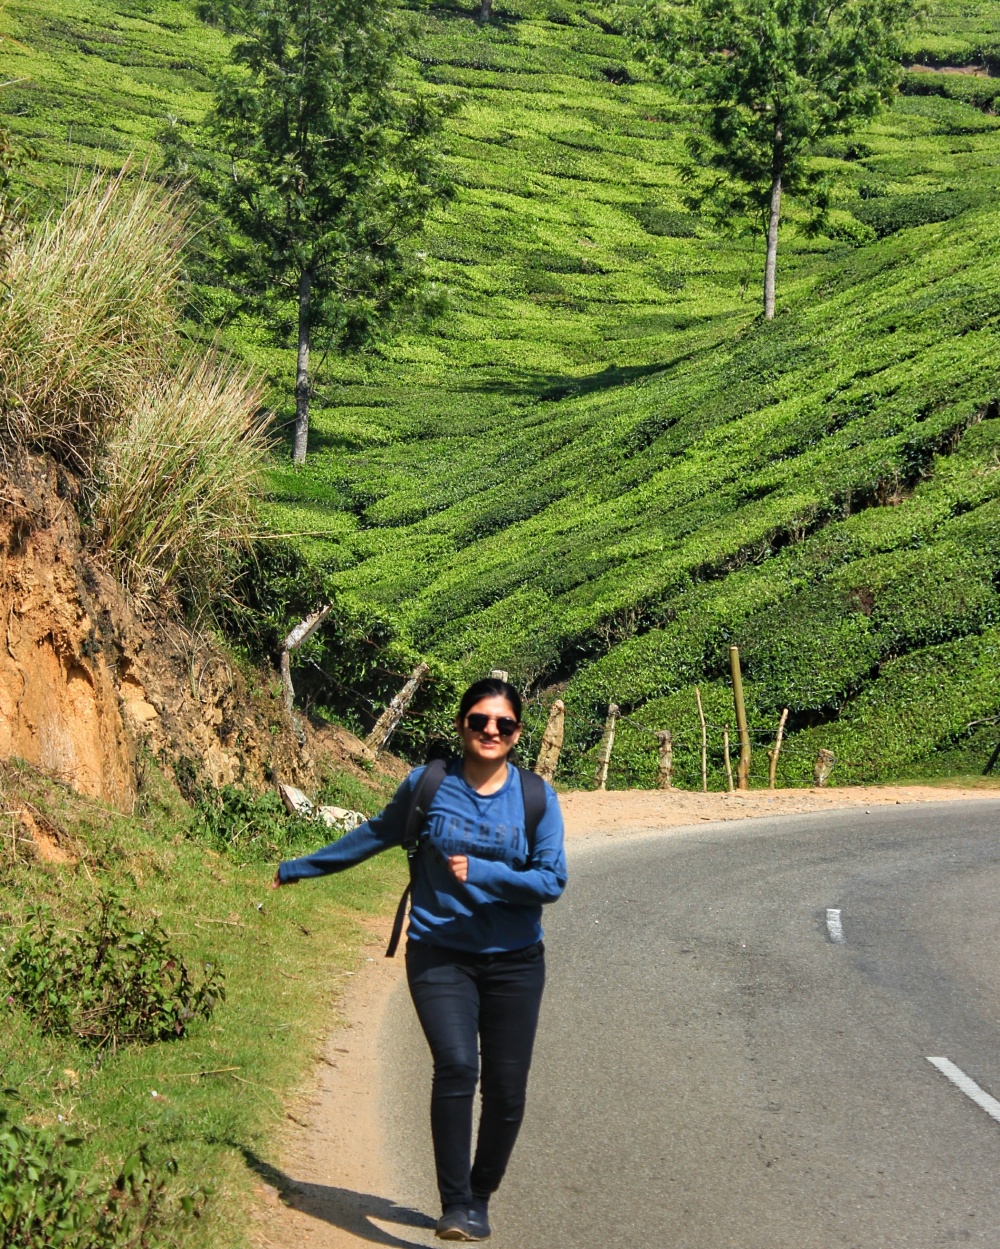 Travelling to munnar, kerala, gods own country kerala, kerala-india. Places to visit in Munnar, Kerala. Places to visit in Kerala, India. 